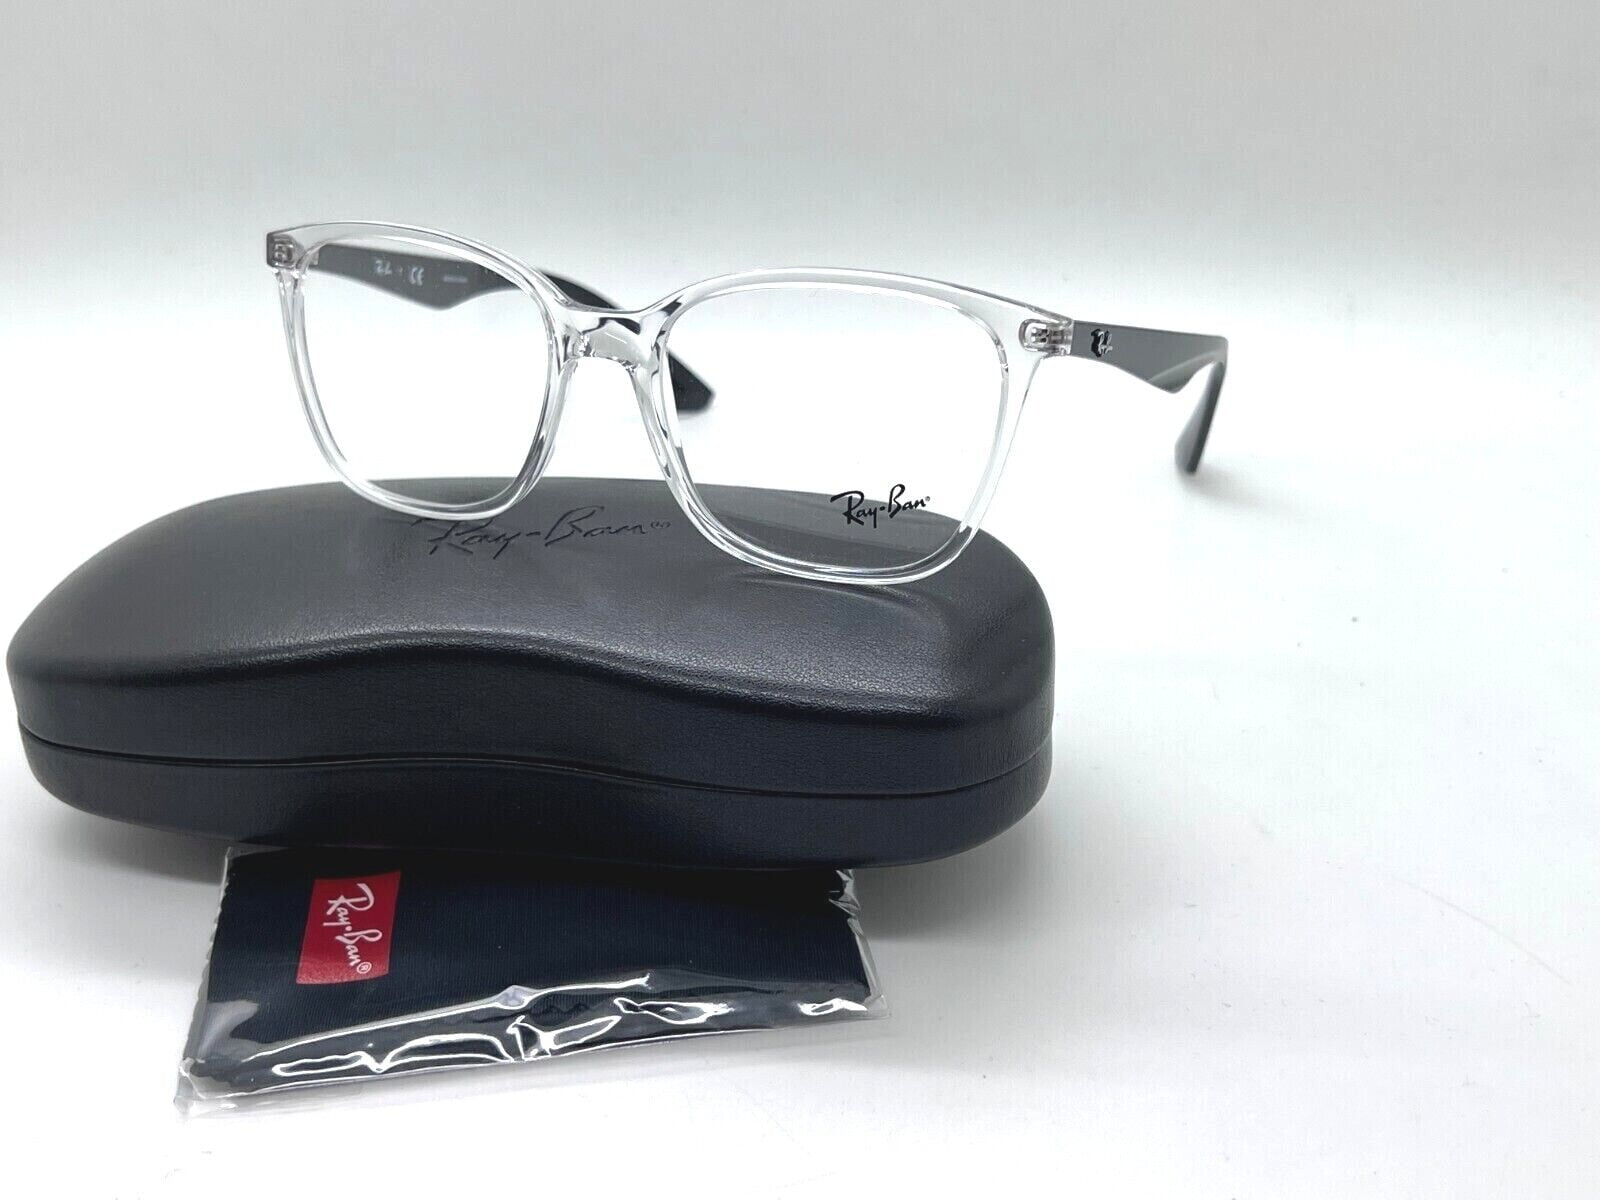 NEW Ray-Ban OPTICAL RB 7066 5943 TRANSPARENT CLEAR EYEGLASSES FRAME  54-17-145MM UNISEX 